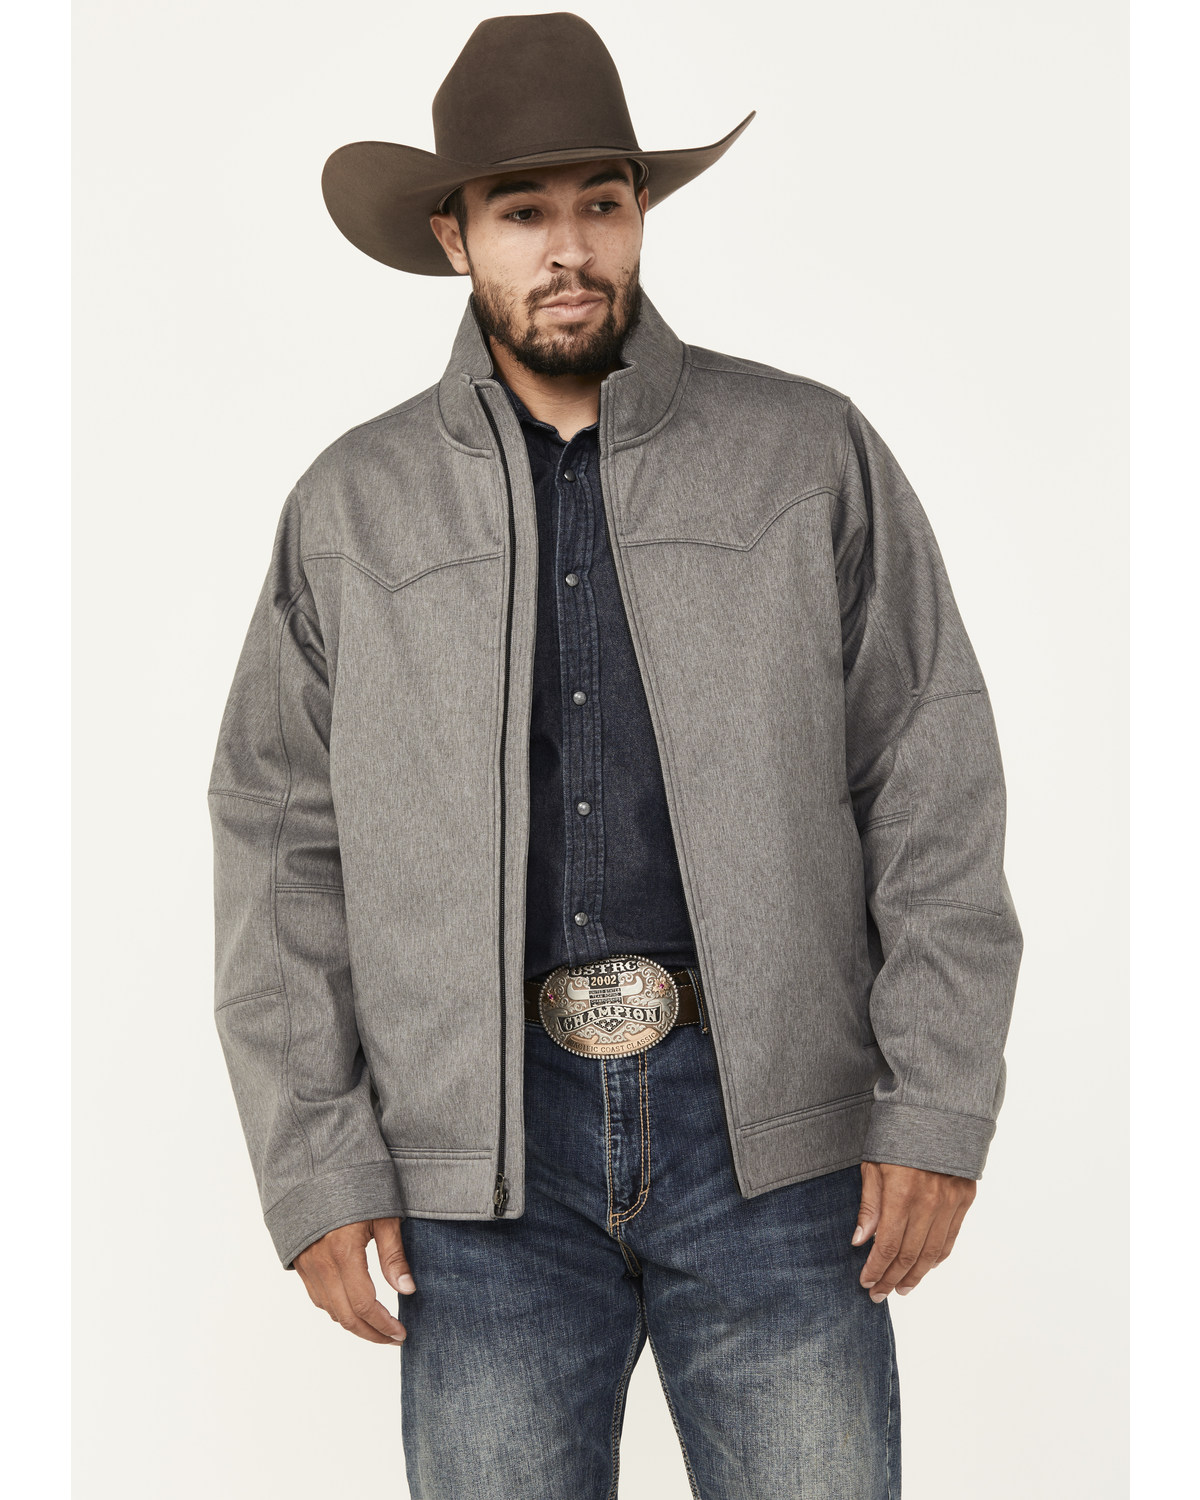 Cinch Men's Textured Concealed Carry Softshell Jacket